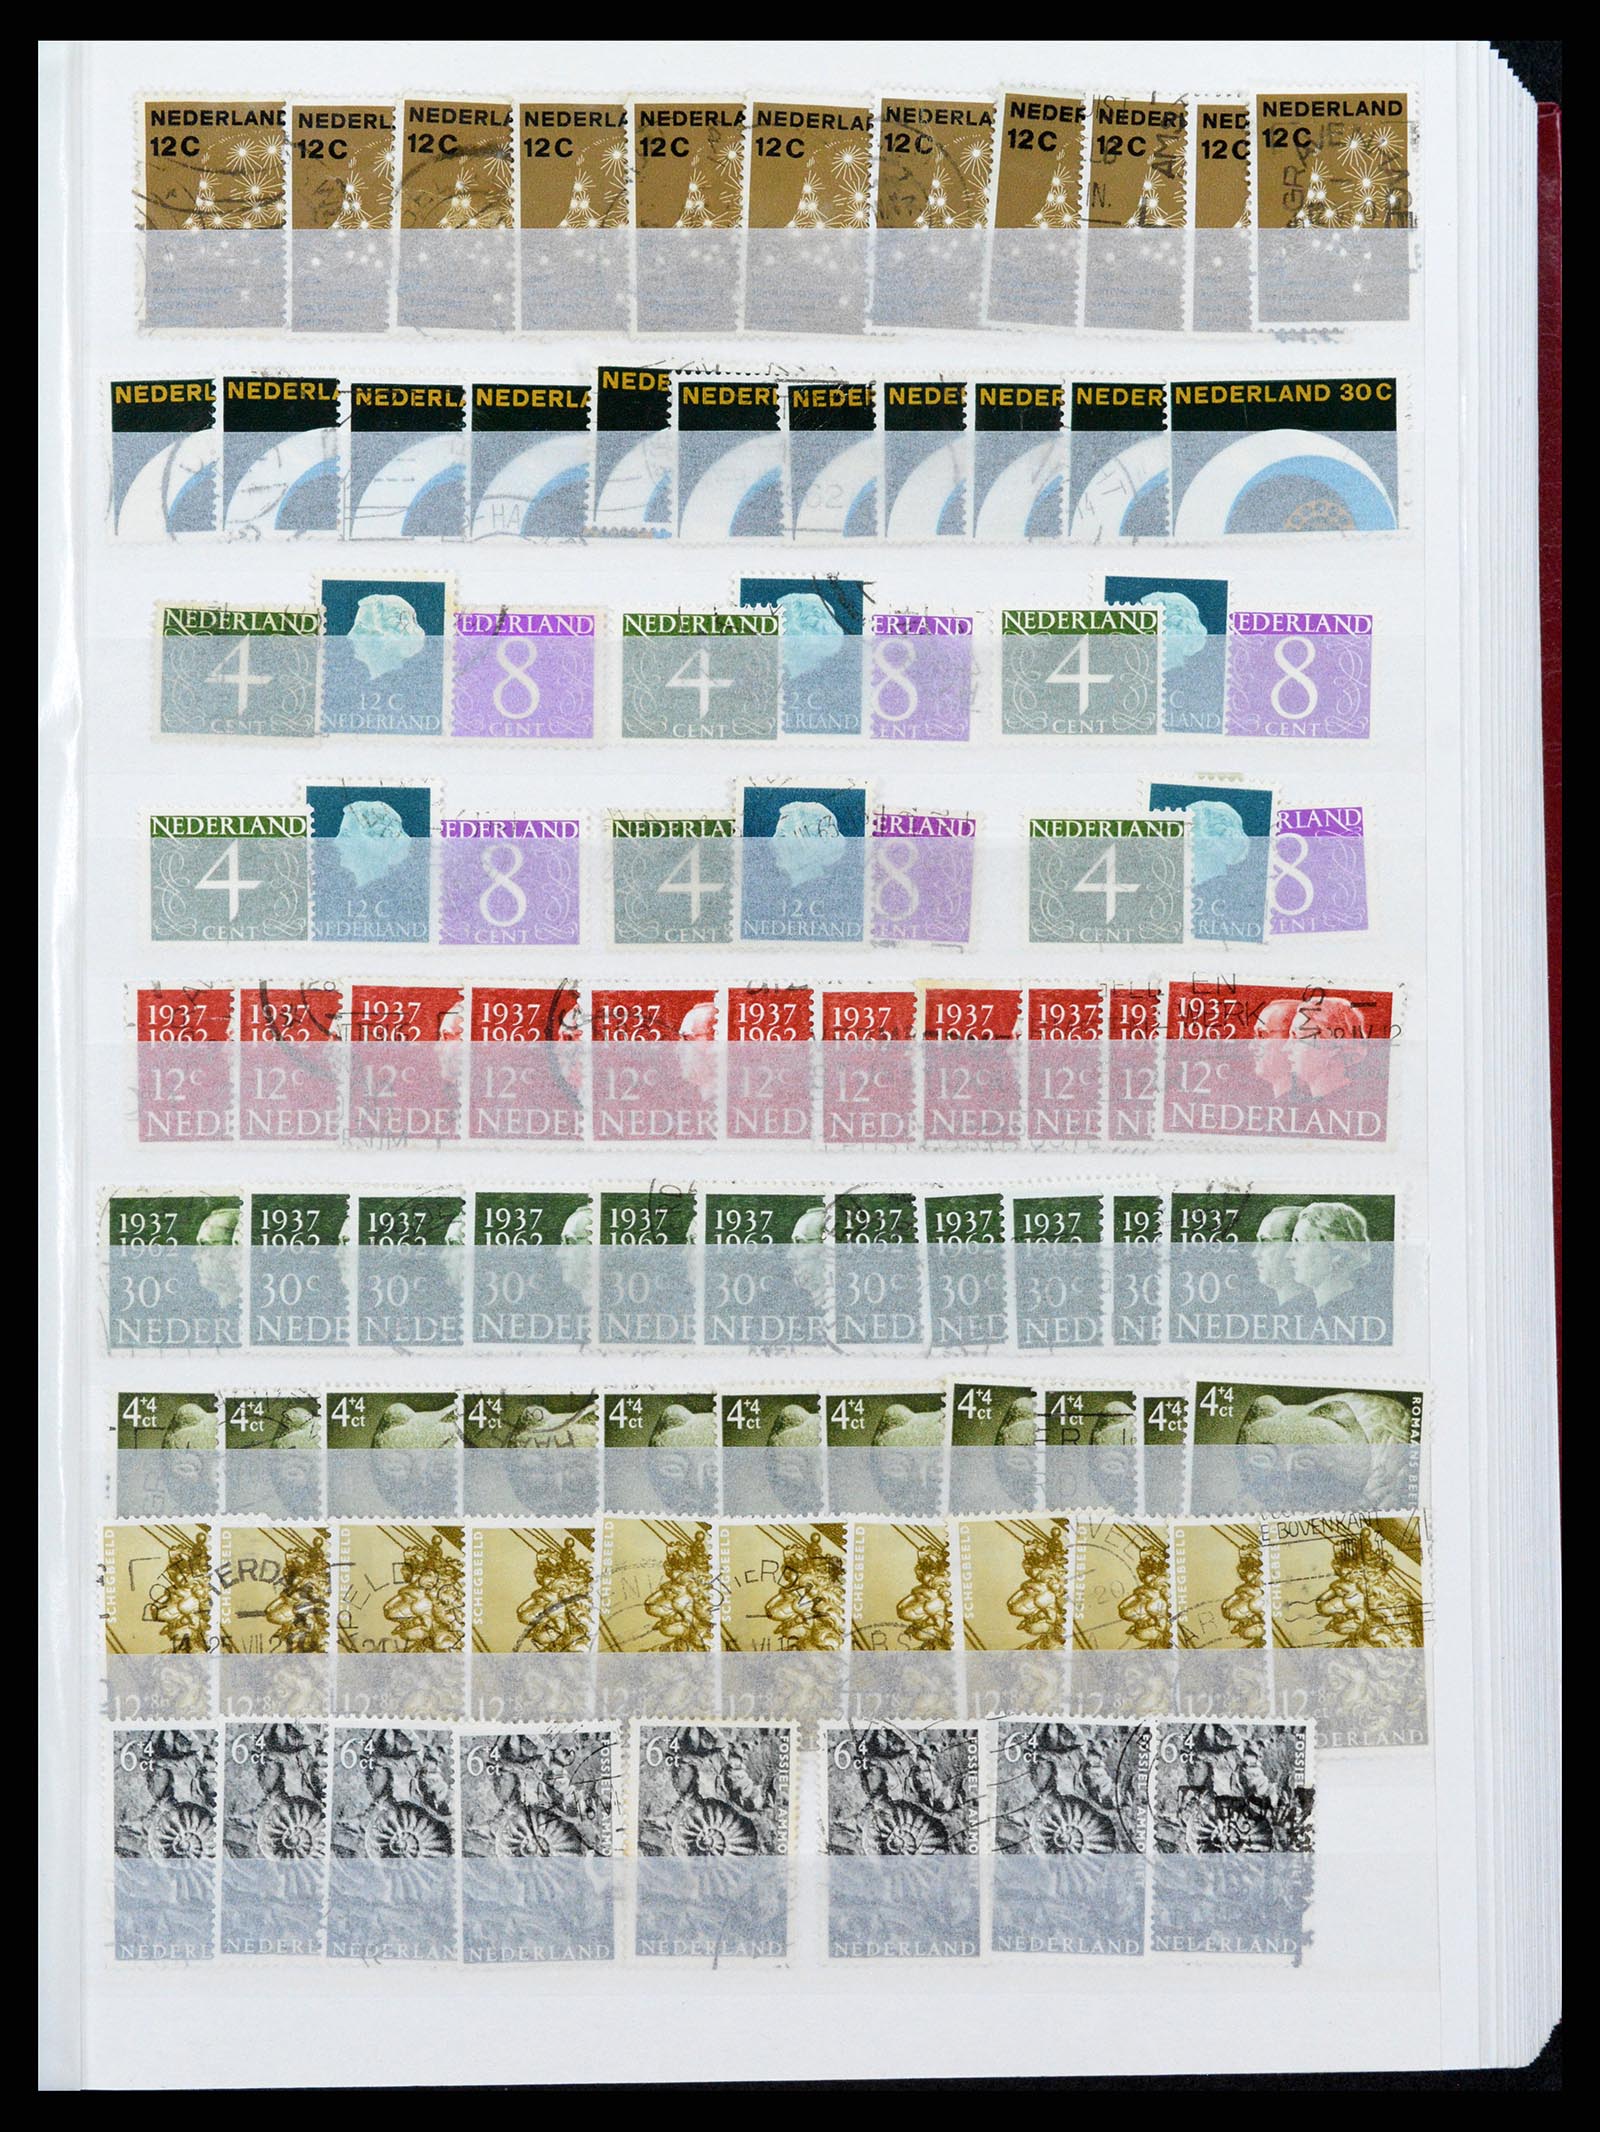 37296 078 - Stamp collection 37296 Netherlands 1852-1981.